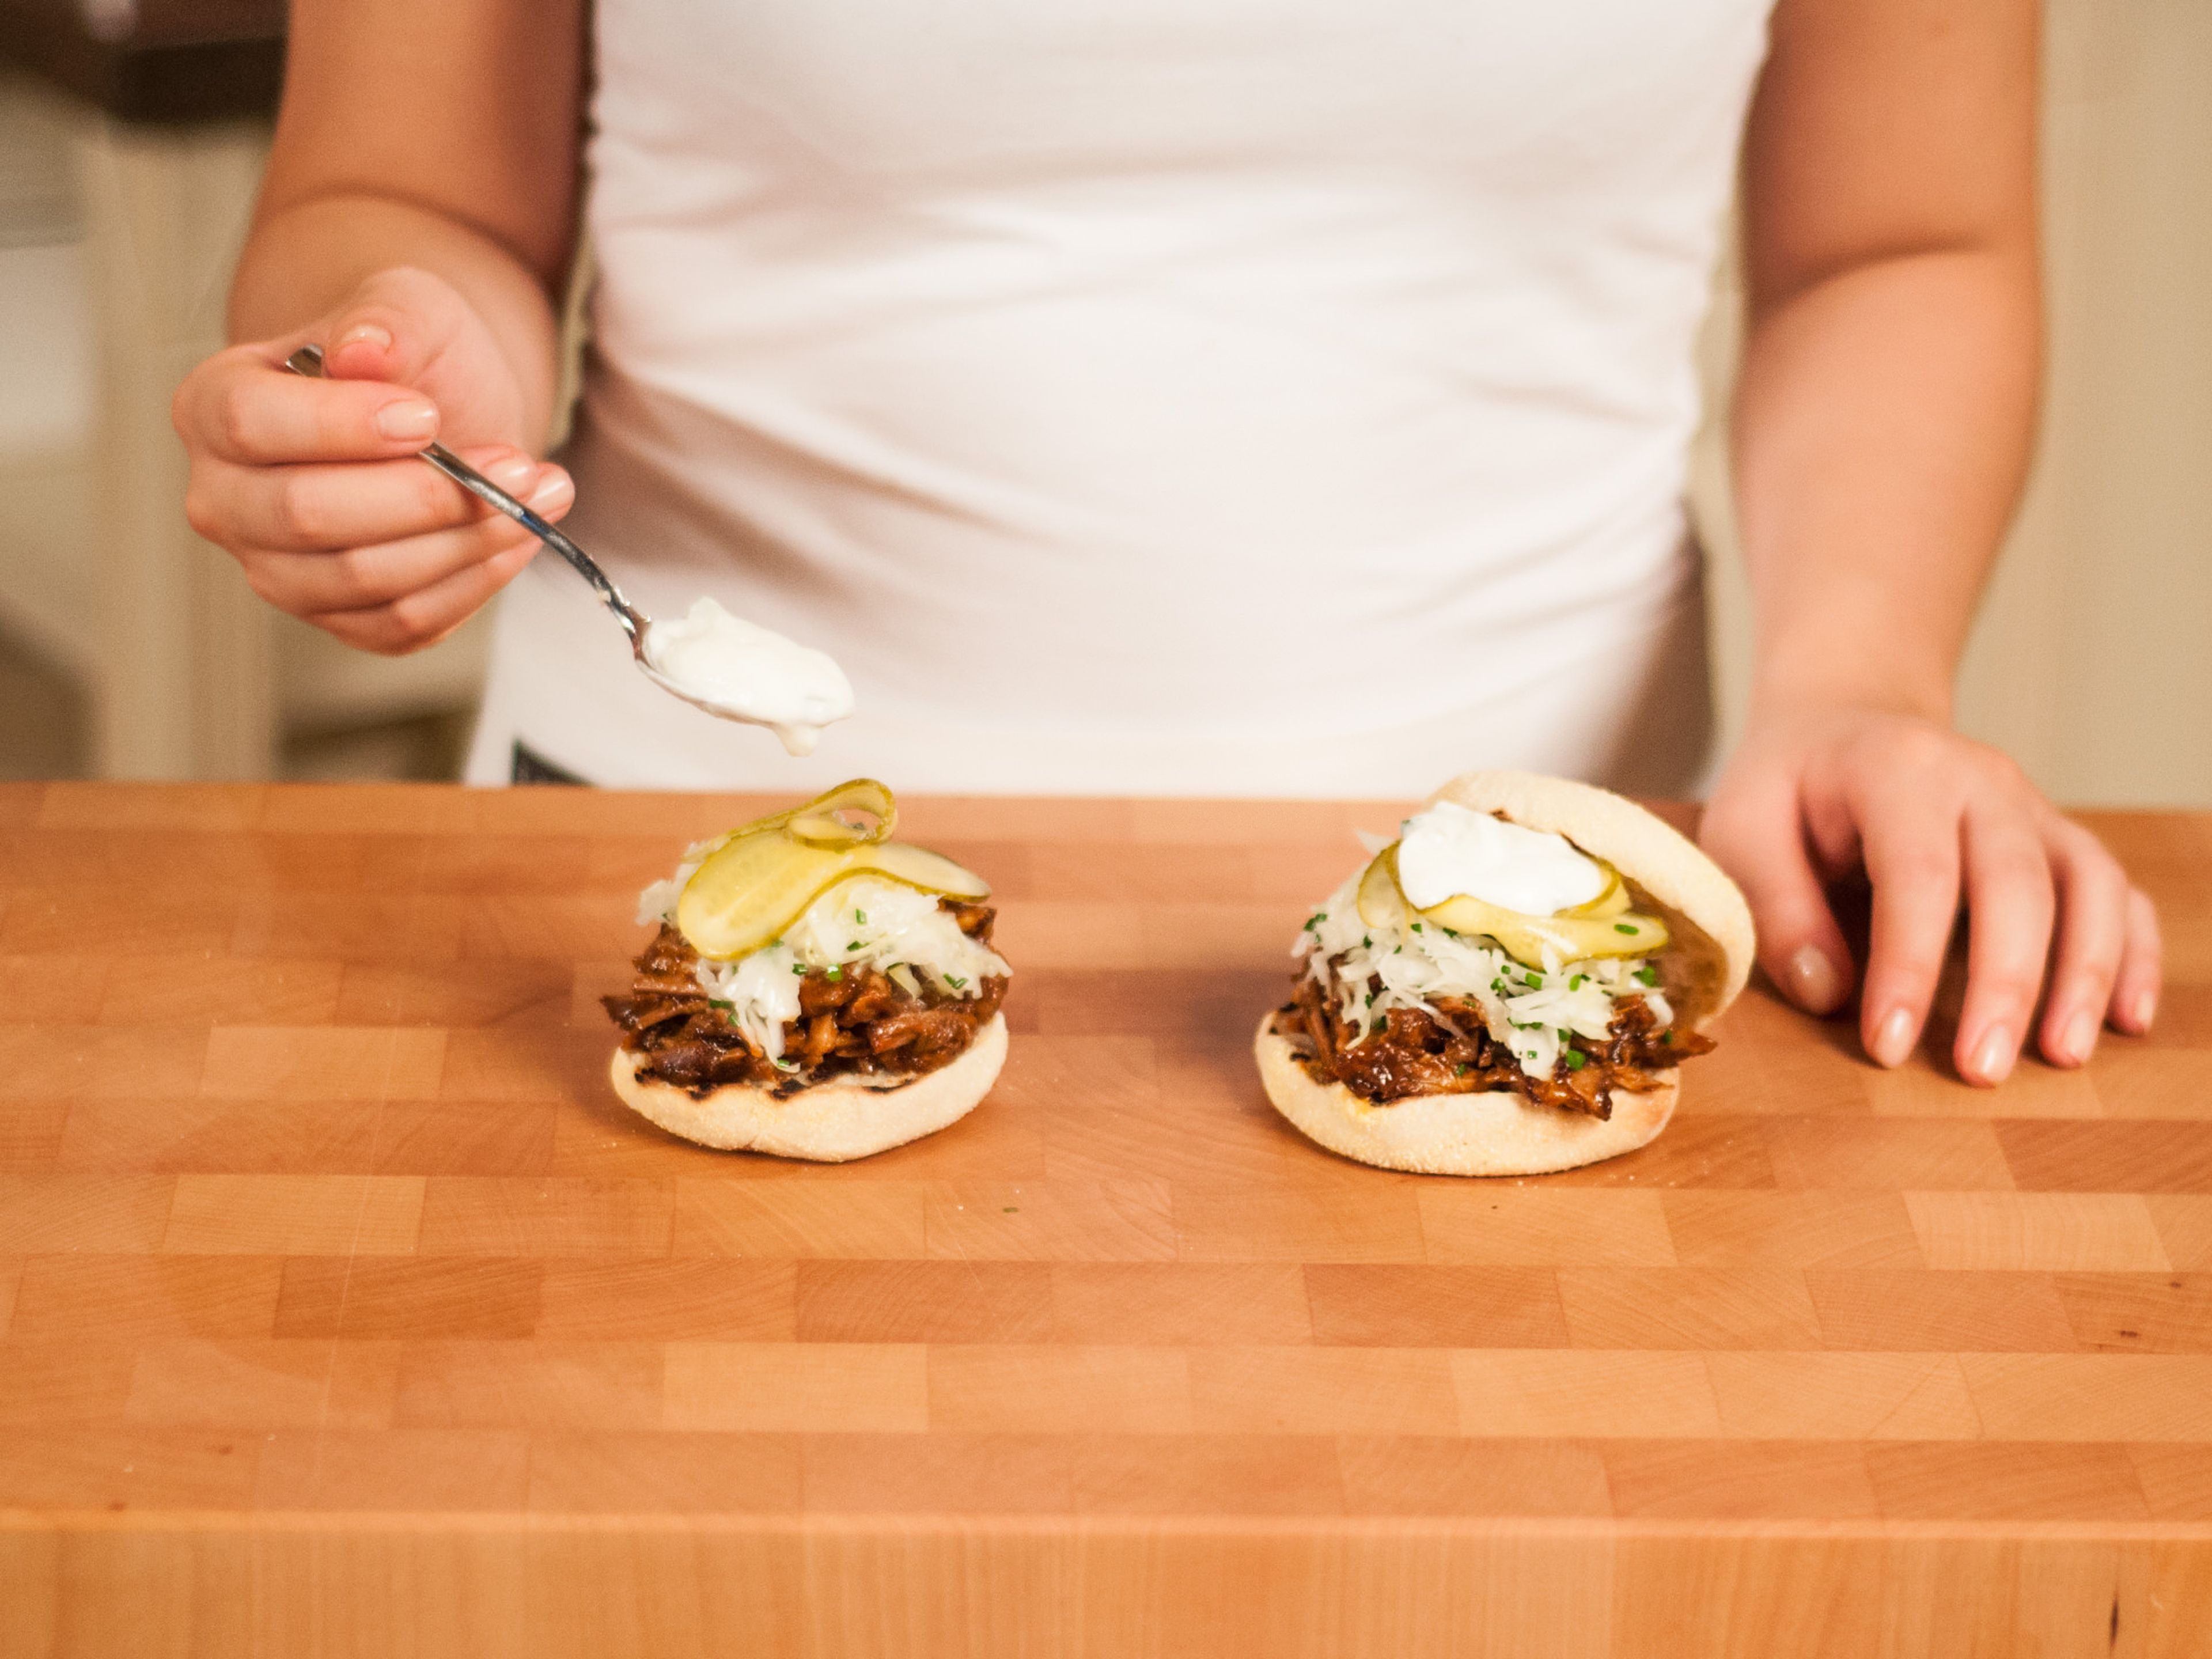 Preheat a grill pan over medium heat. Grill buns for approx. 1 - 2 min. on each side. Place shredded pork onto the bun. Serve topped with cabbage, pickles, and sour cream.